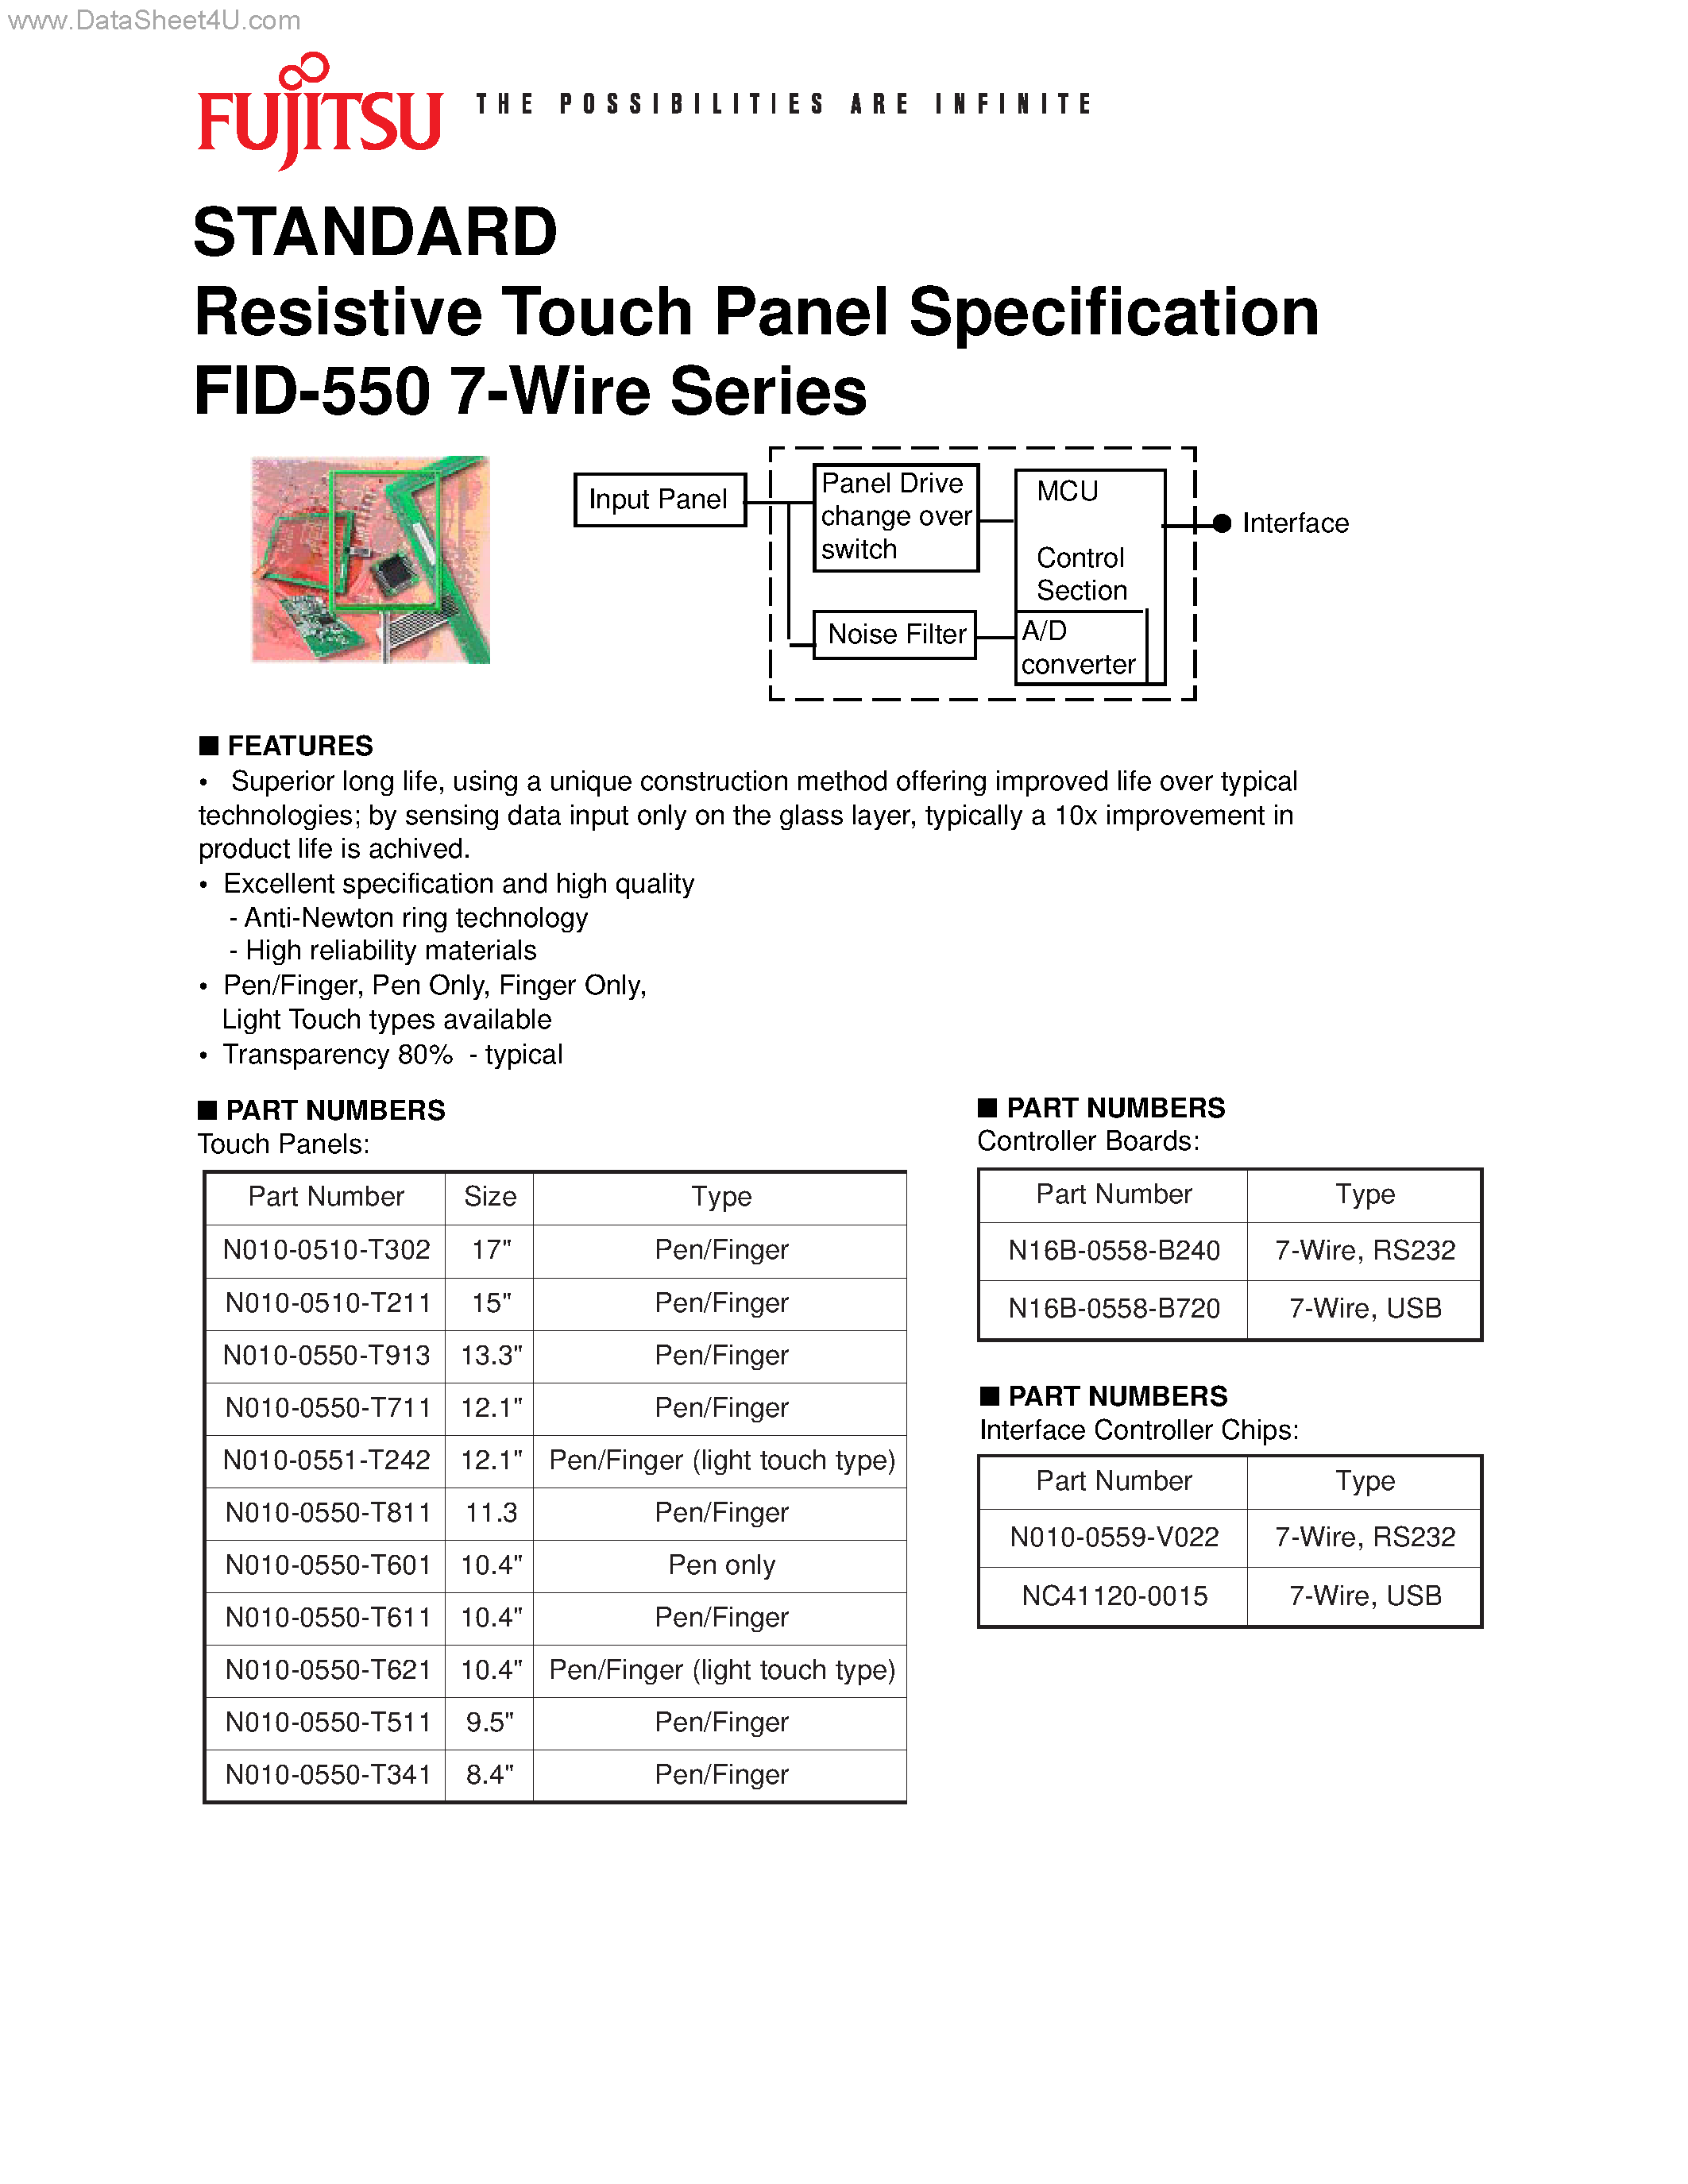 Datasheet NC41120-0015 - Resistive Touch Panel Specification page 1